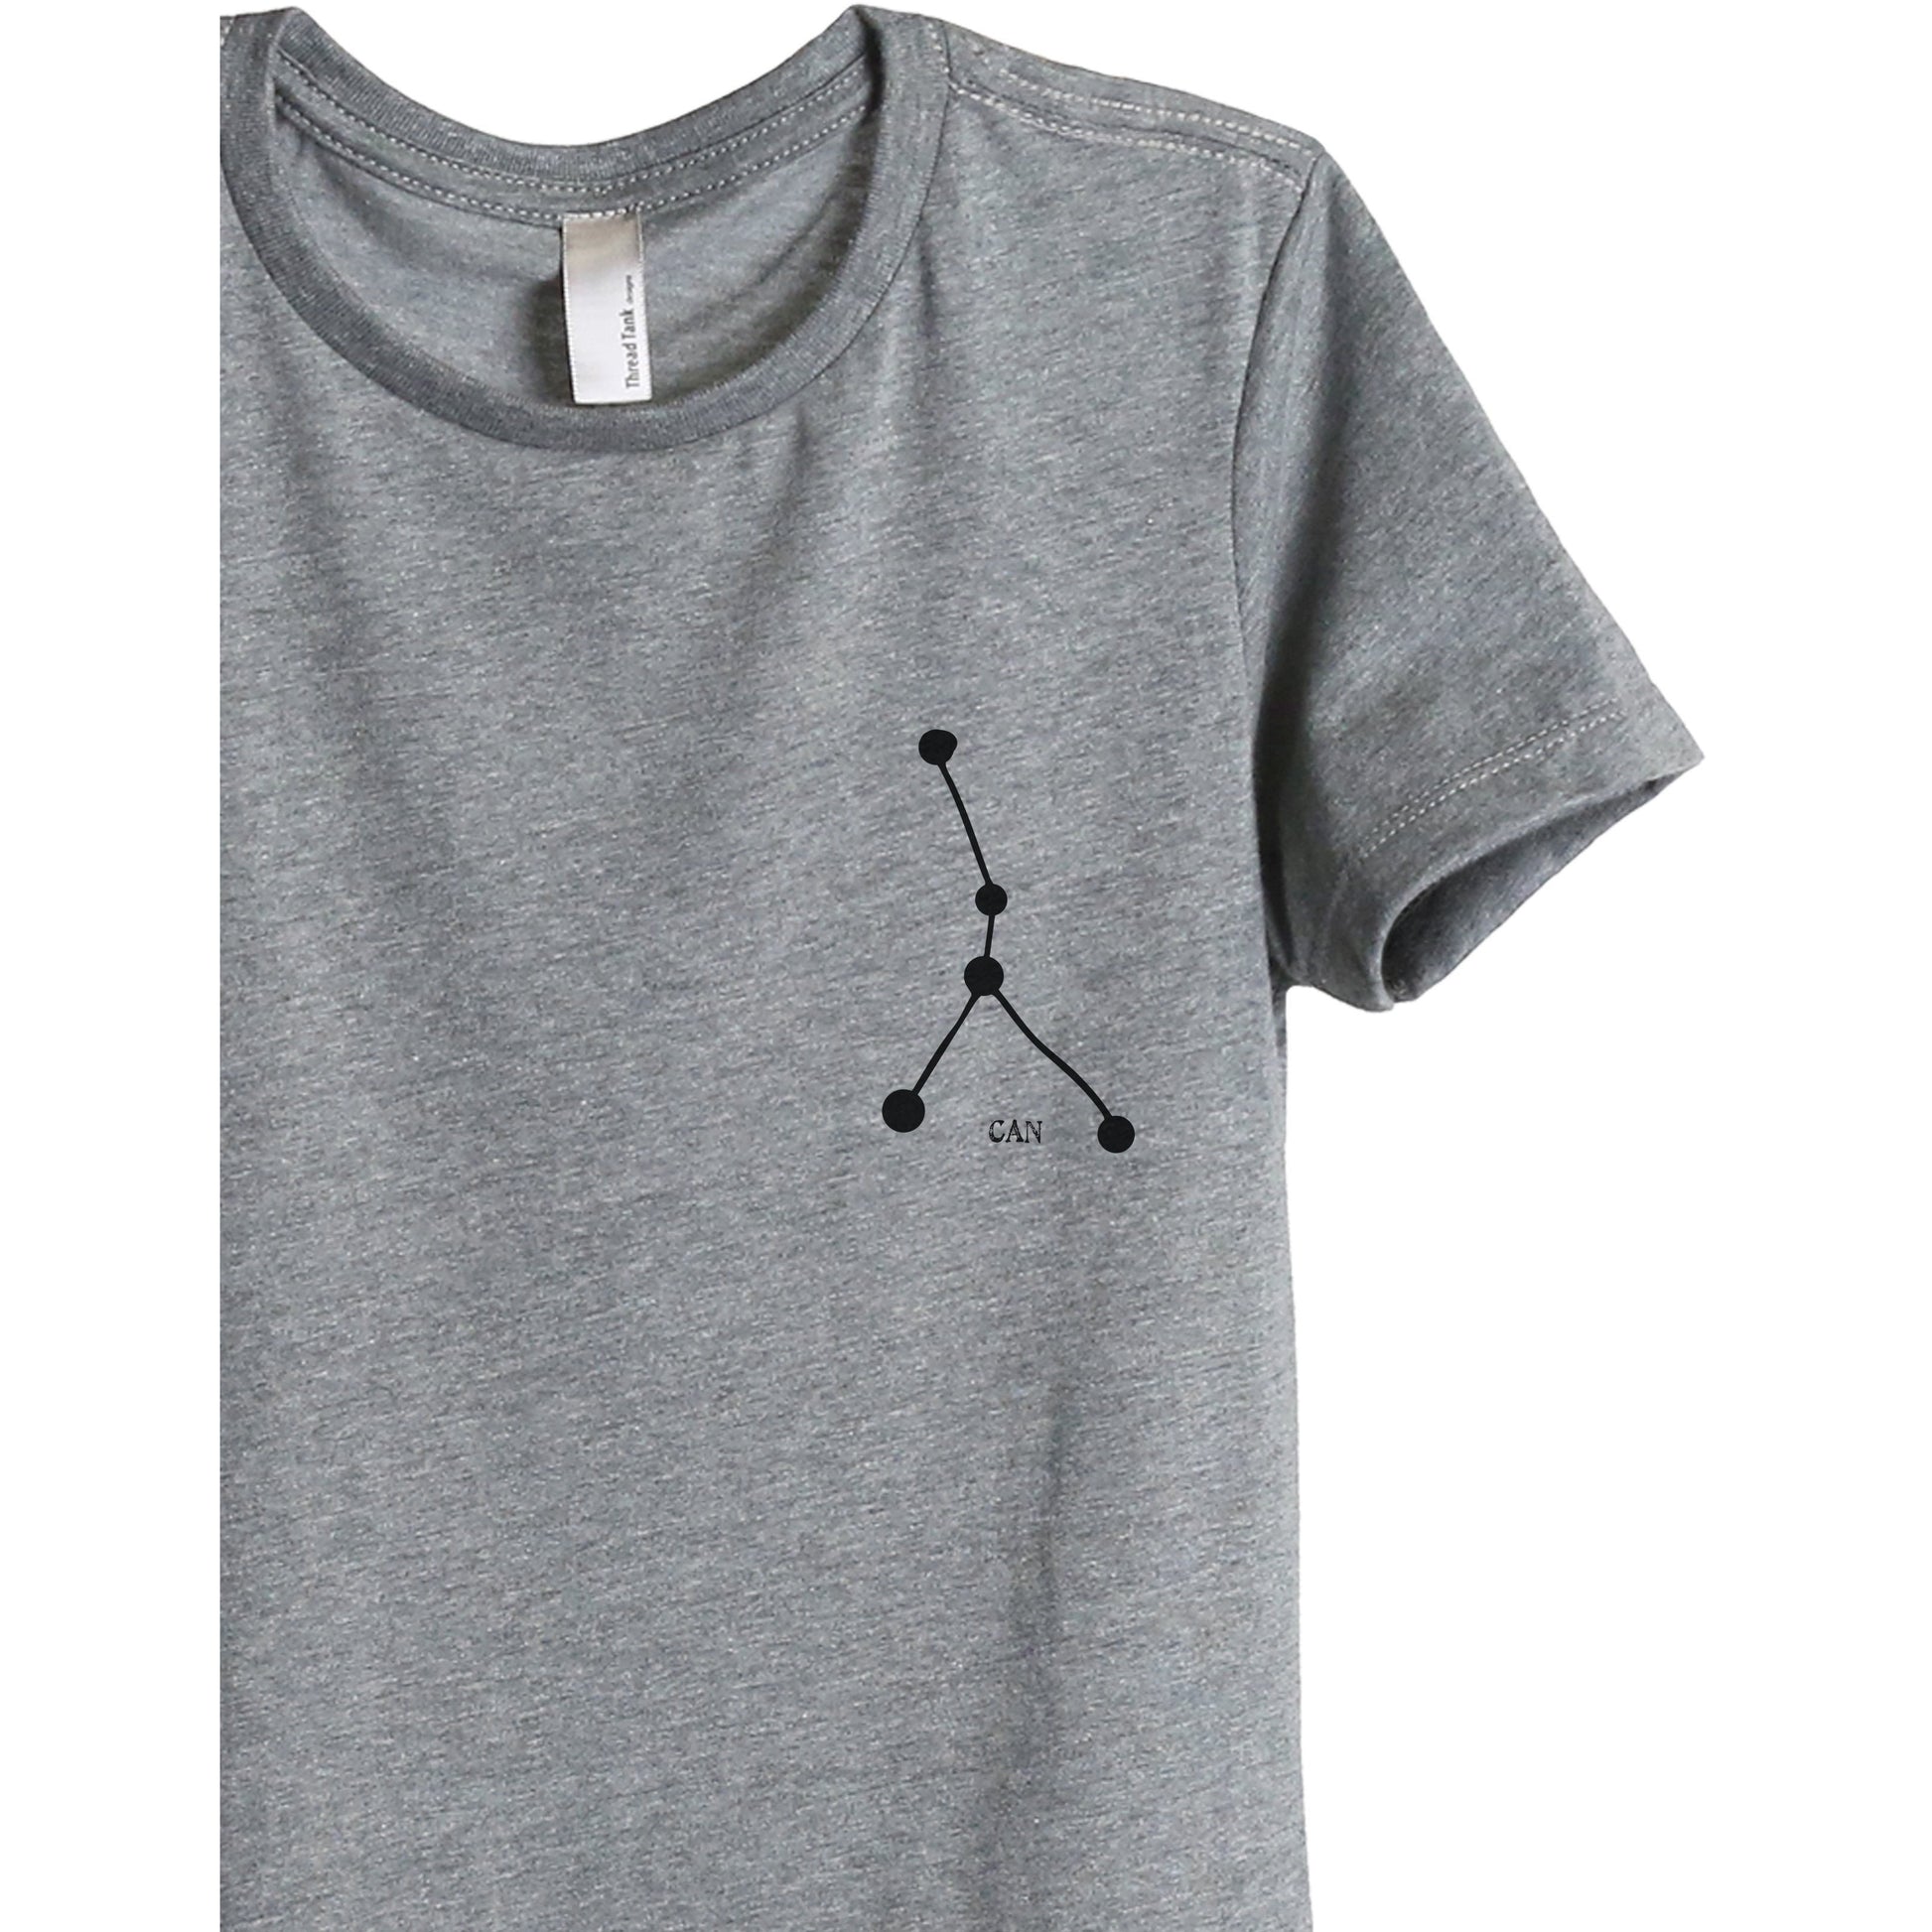 Cancer CAN Constellation Astrology Women's Relaxed Crewneck T-Shirt Top Tee Heather Grey Zoom Details
